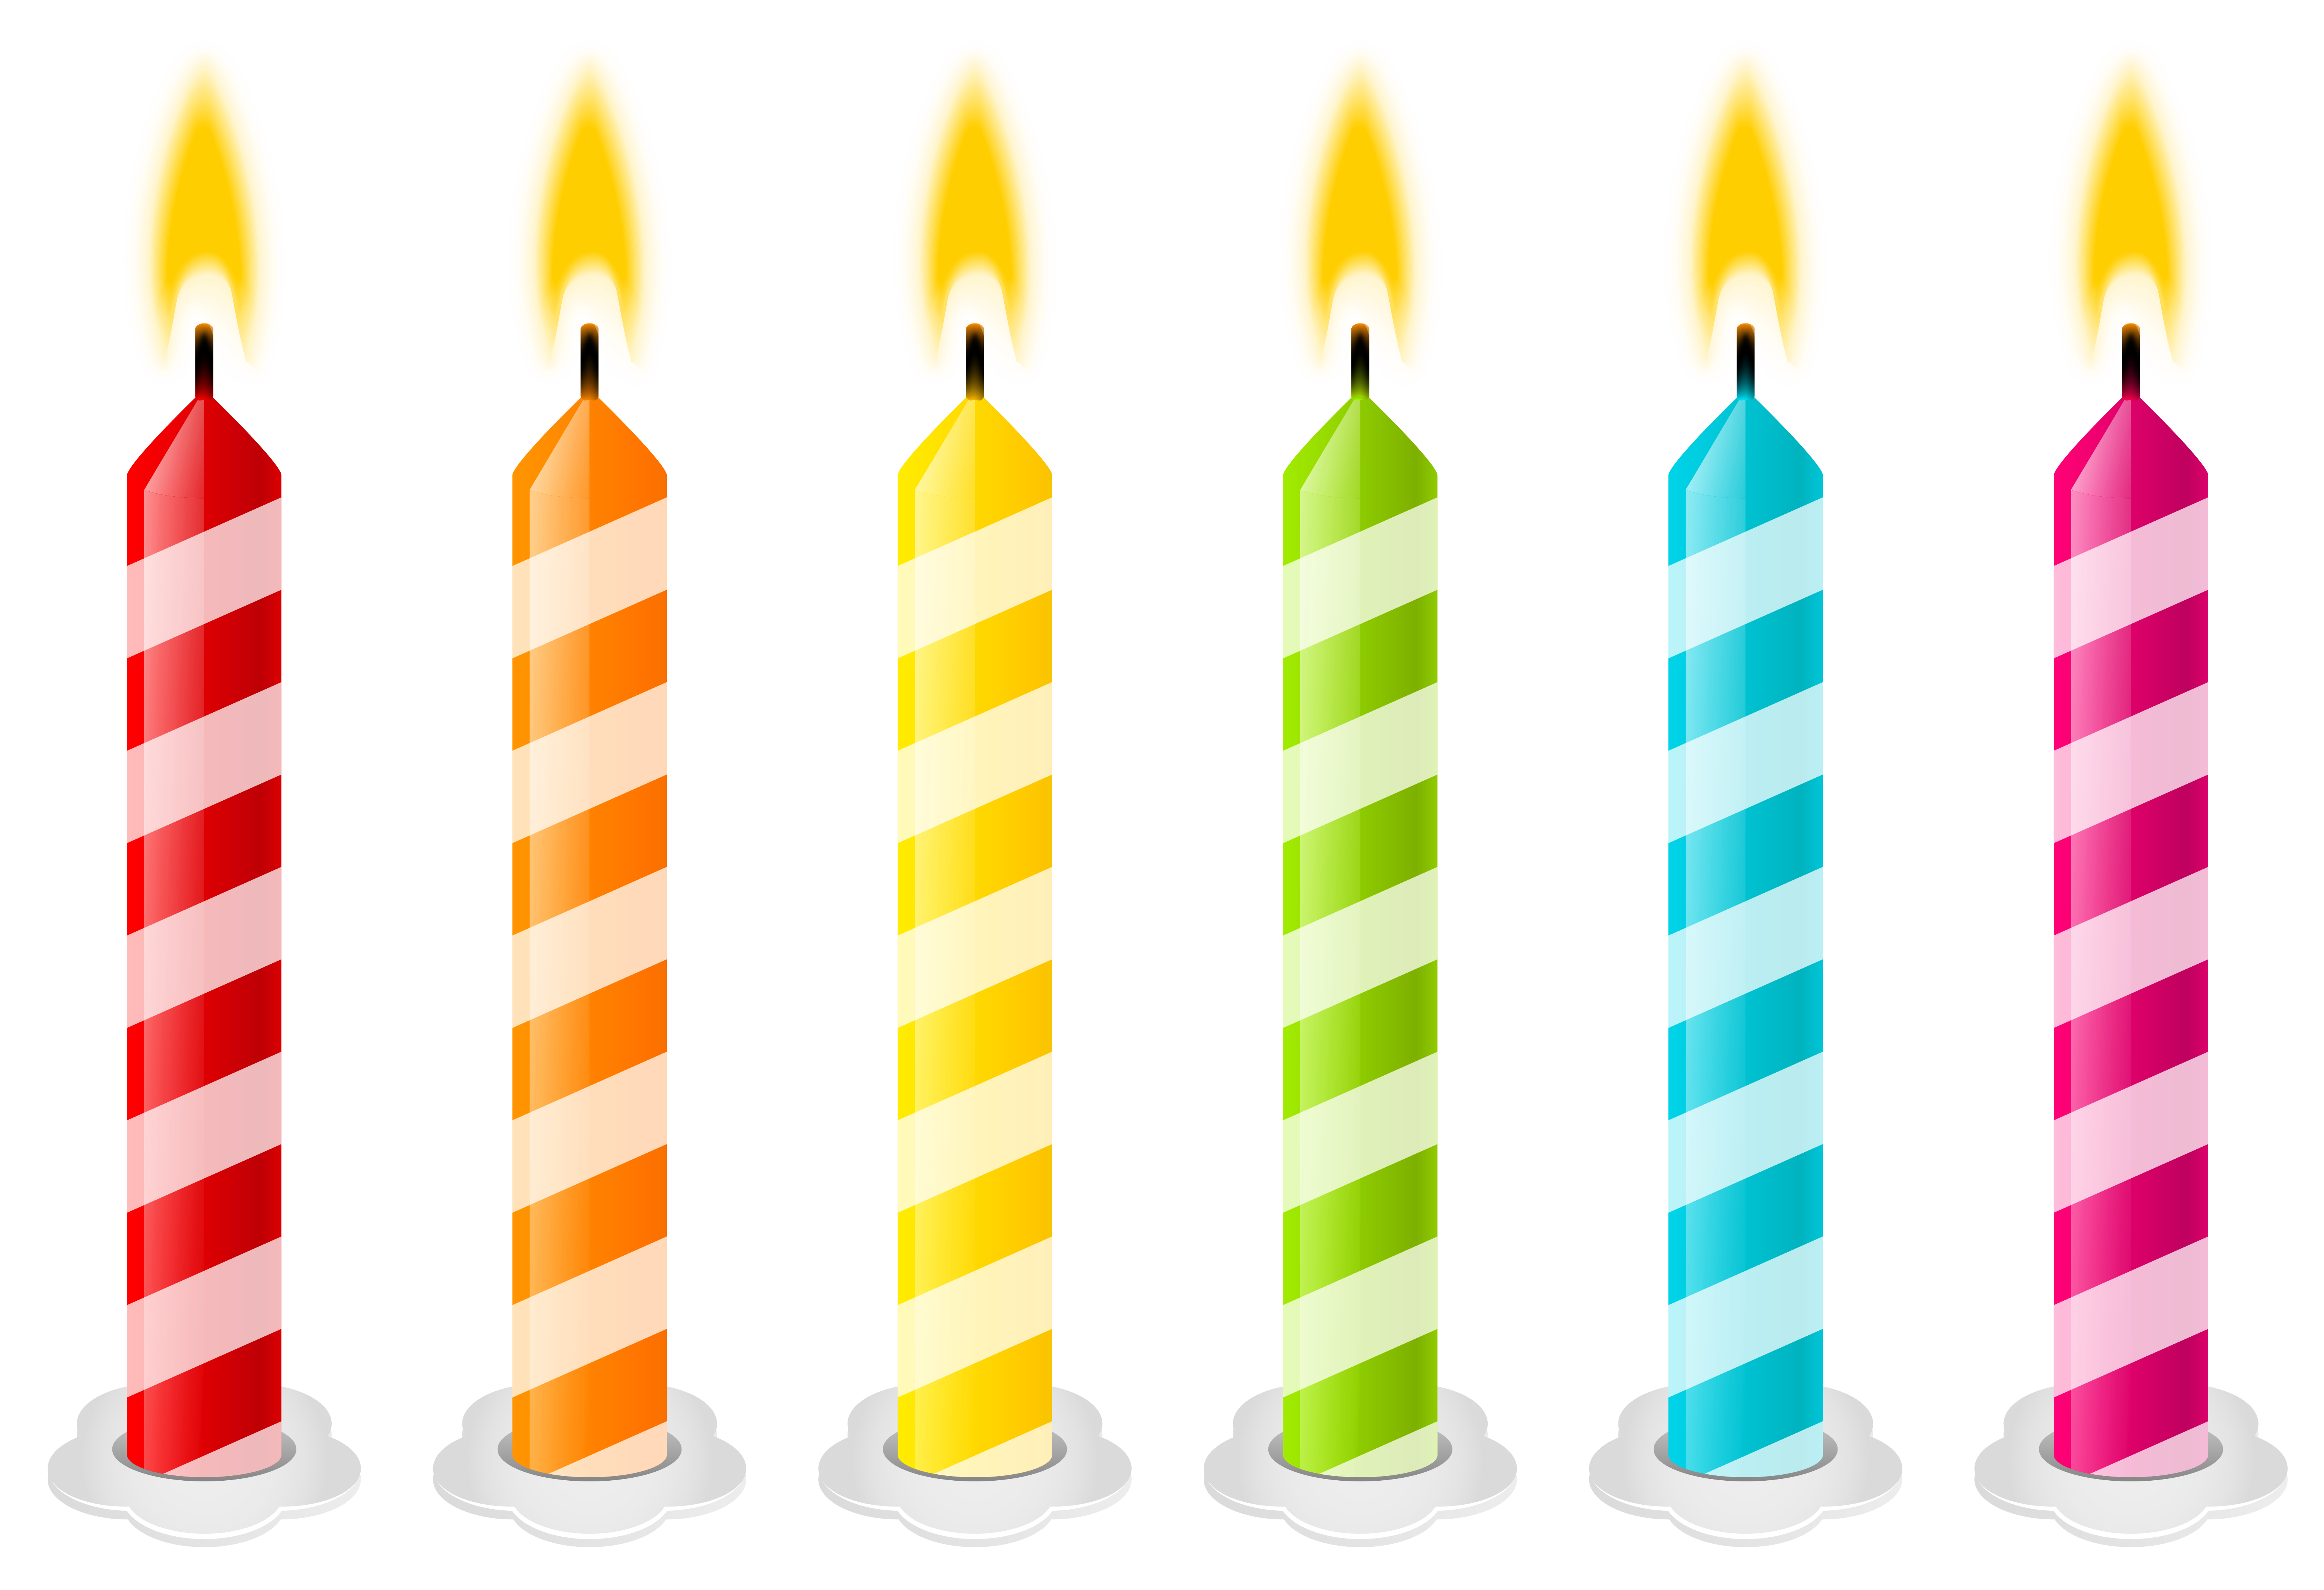 candle flame: Candle icon on 